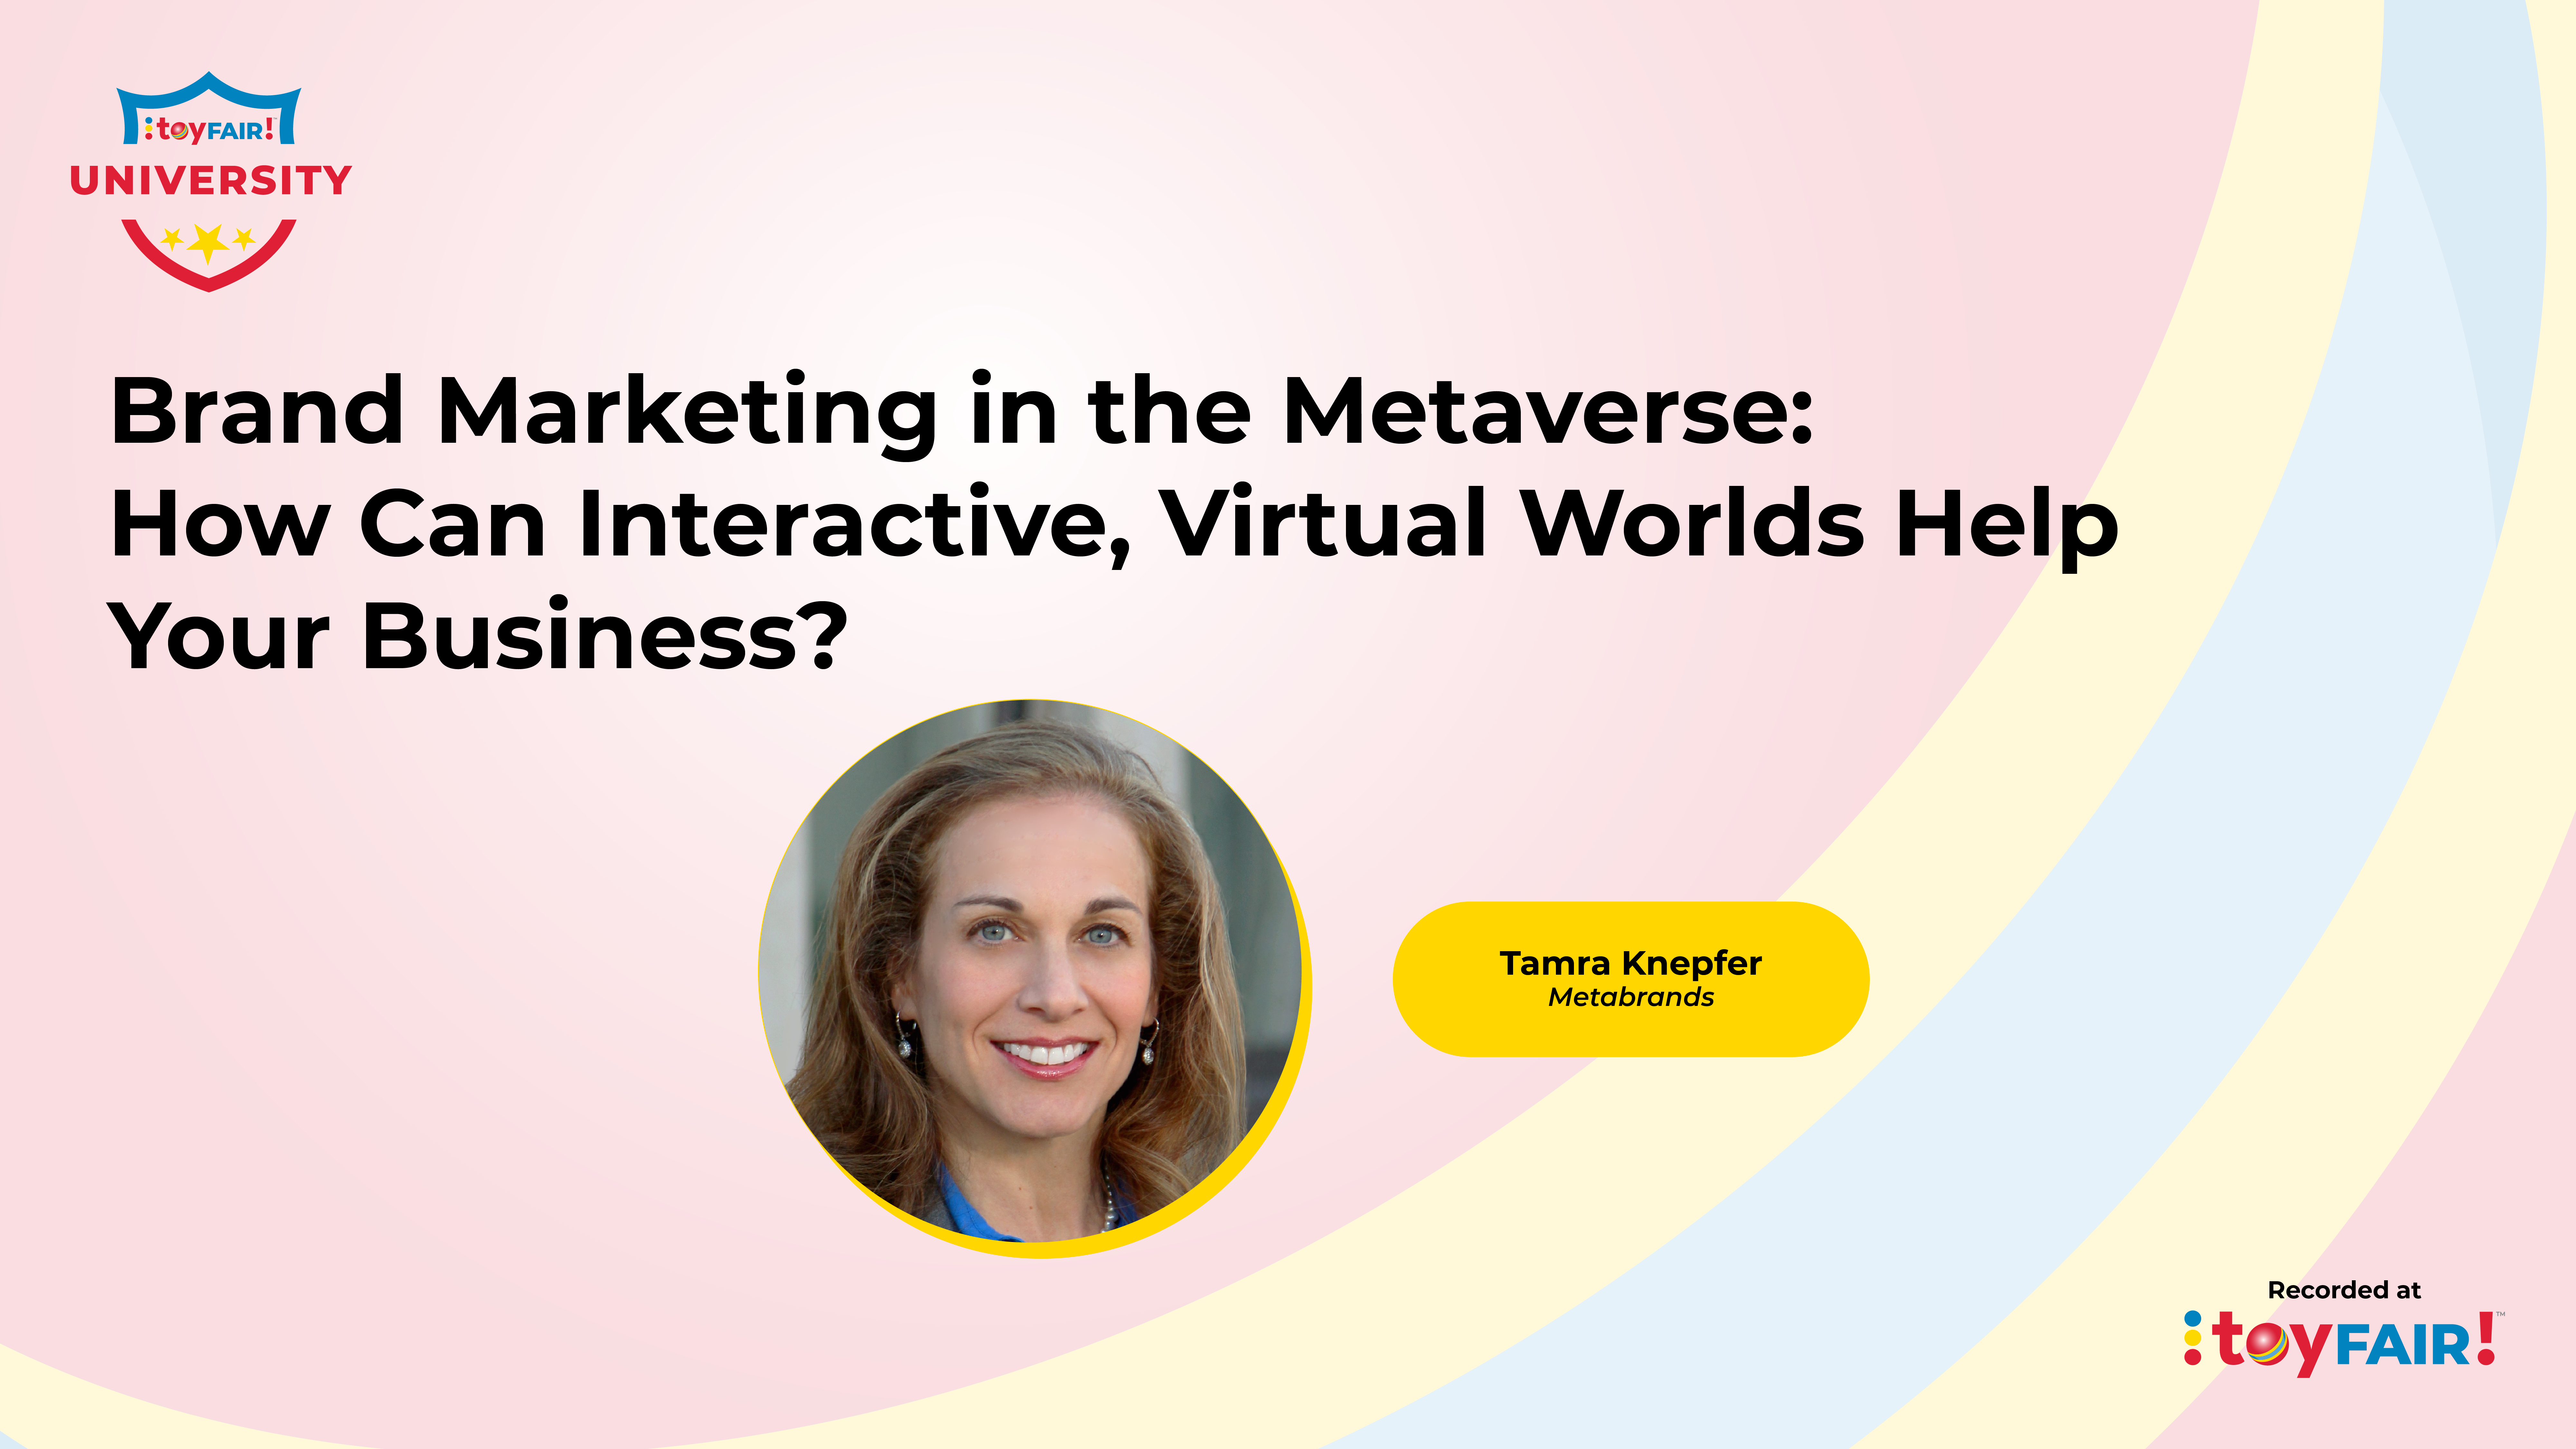 Brand Marketing in the Metaverse: How Can Interactive, Virtual Worlds Help Your Business?